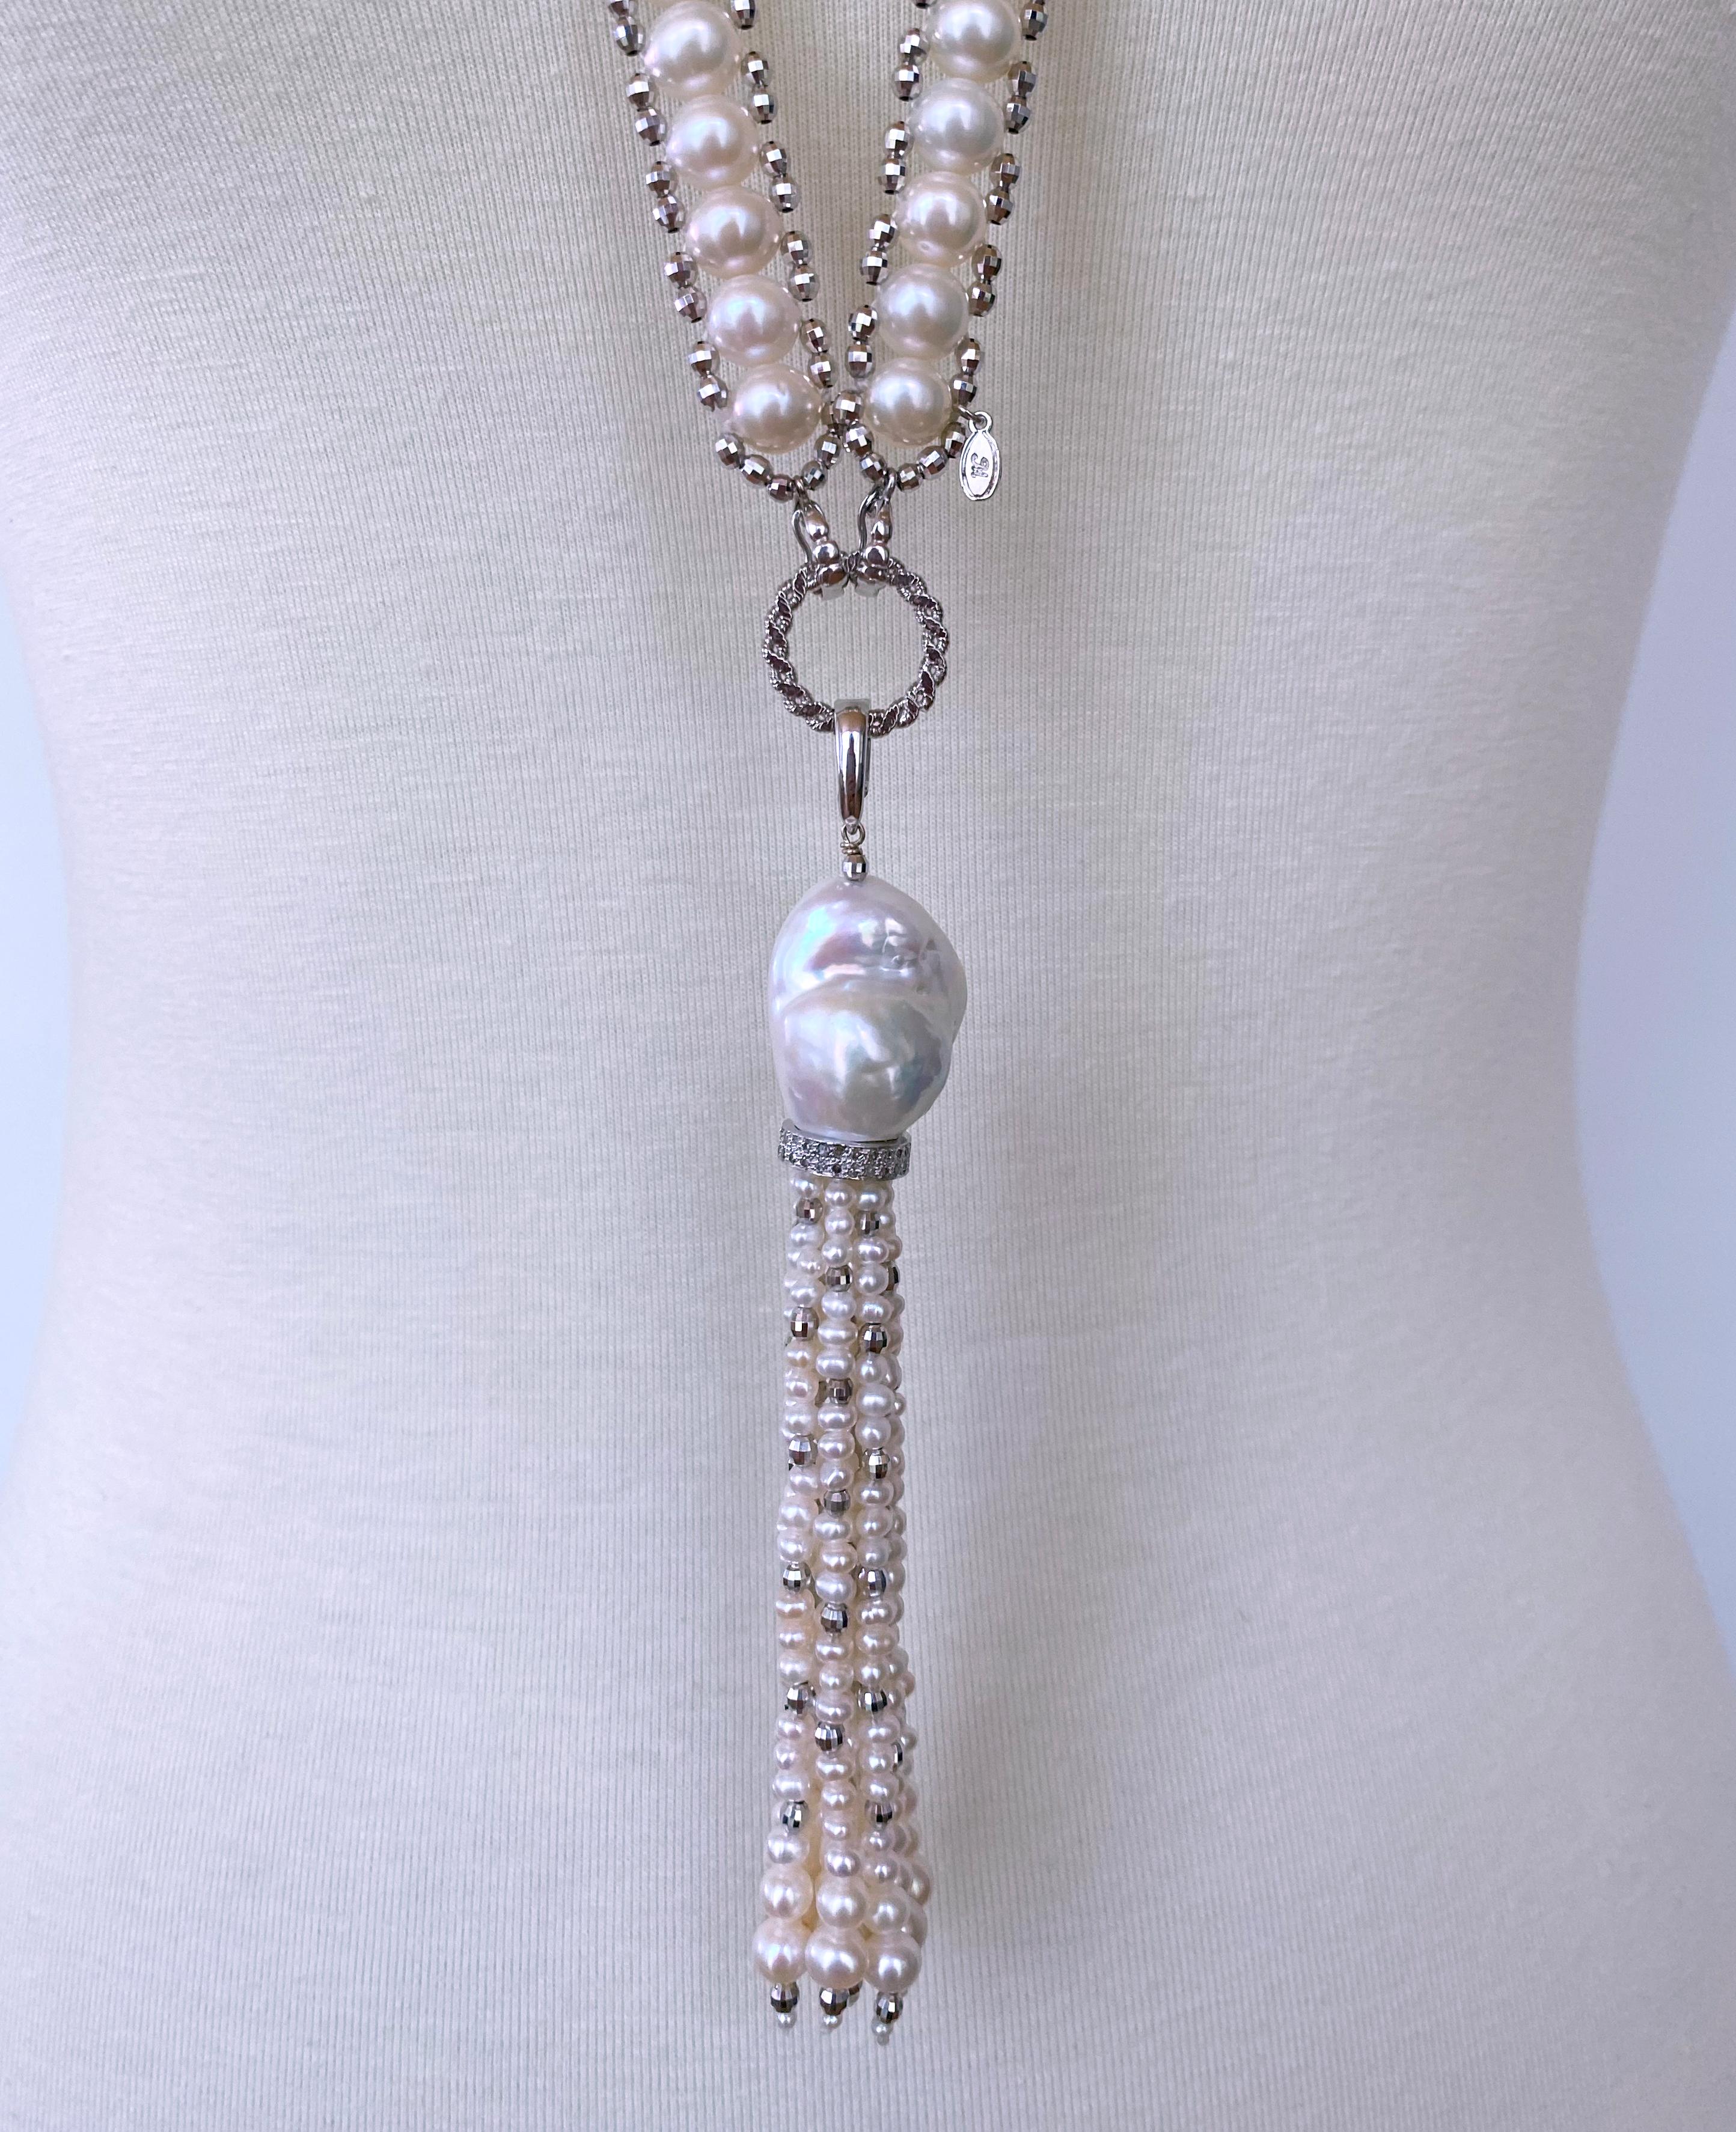 Amazing piece by Marina J. This striking Sautoir is made using all cultured white Pearls and adorned in gleaming faceted Rhodium Plated - Silver beads and detailing. Each Silver bead has multiple facets on them, giving an almost Disco Ball like